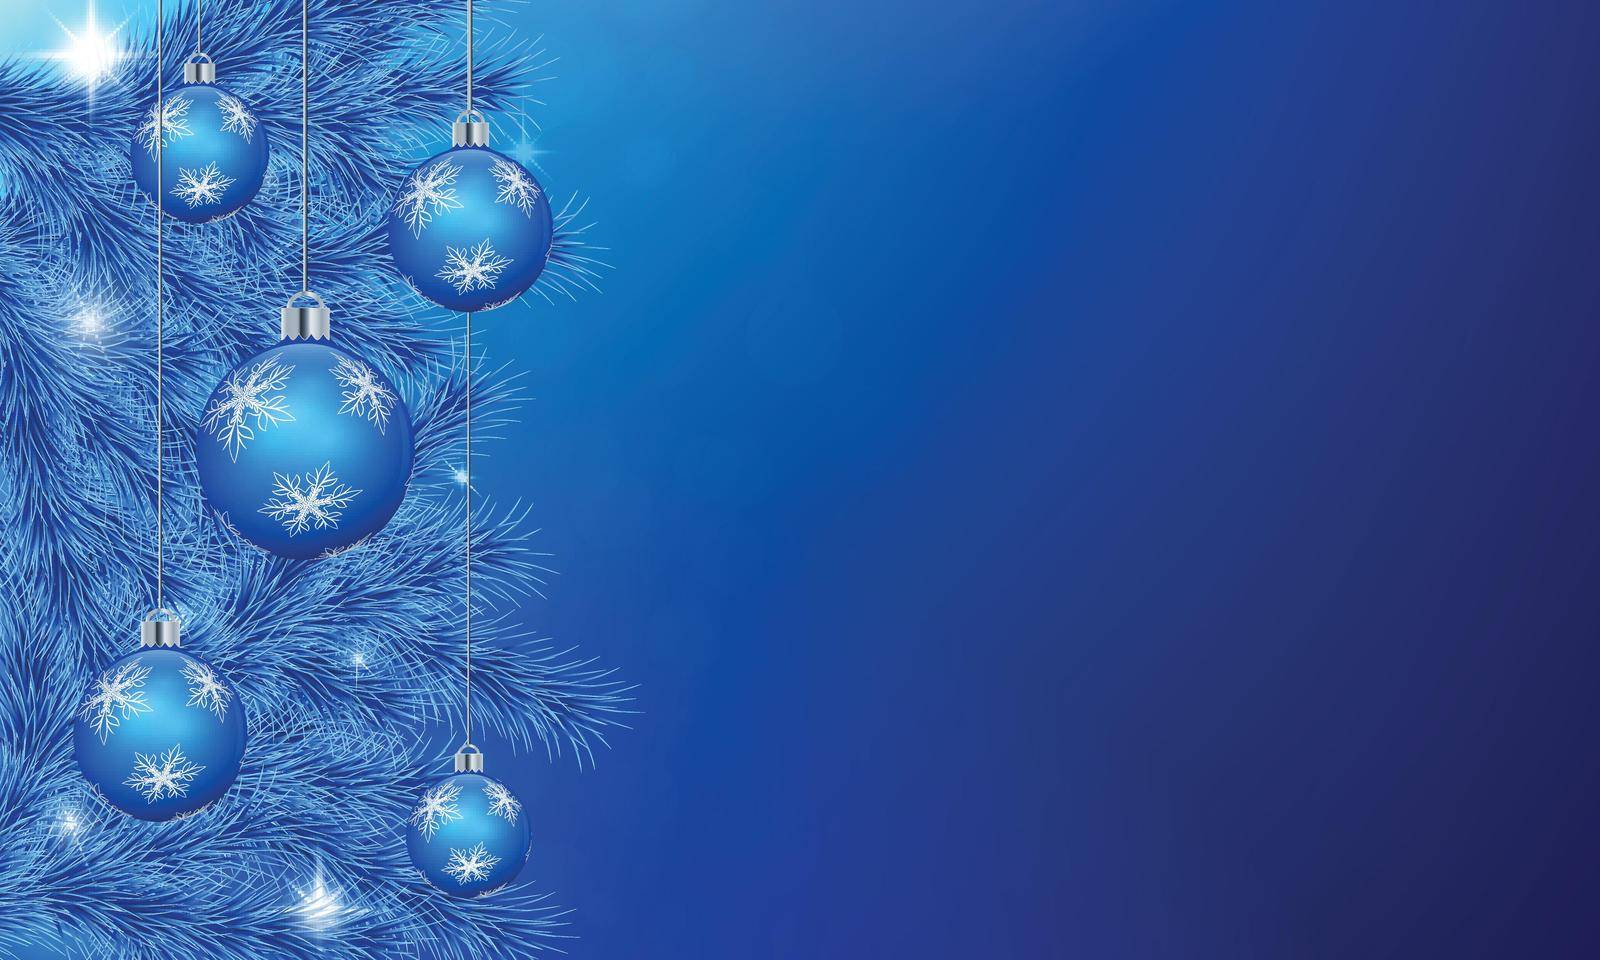 Festive background with blue pine tree branch. Hanging shiny christmas balls, stars decoration.